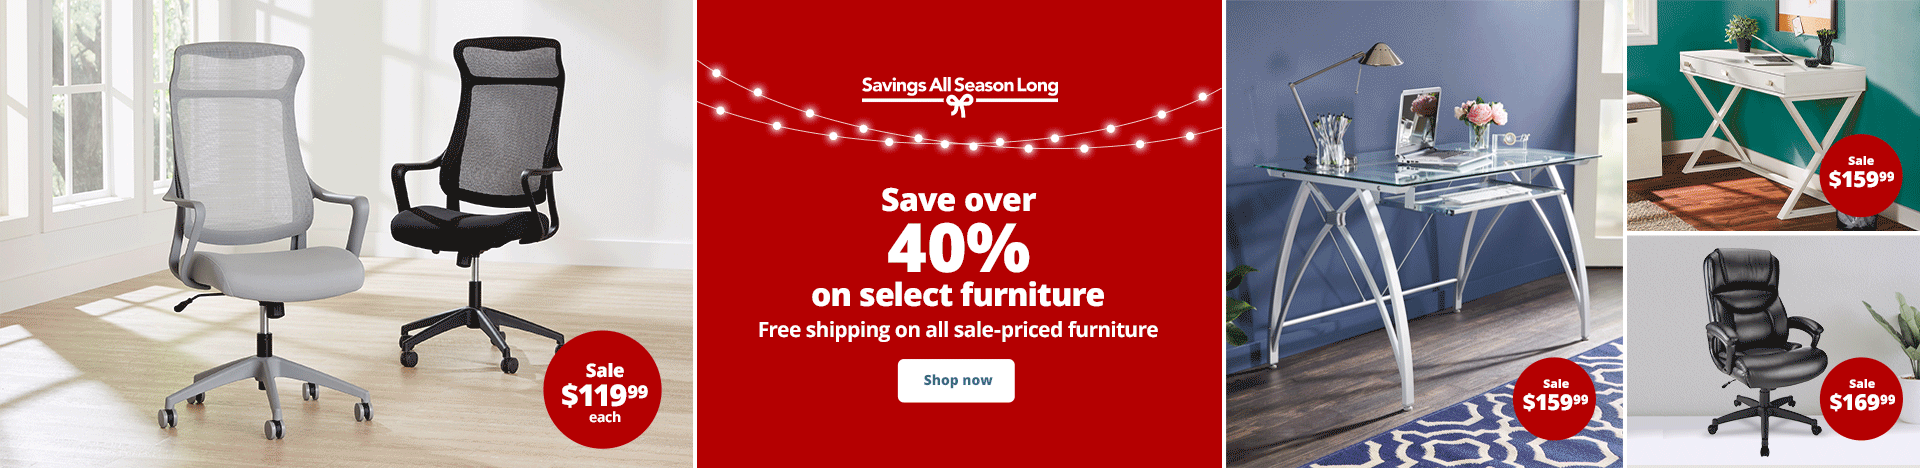 Save over 40% on select furniture. Free shipping on all sale-priced furniture